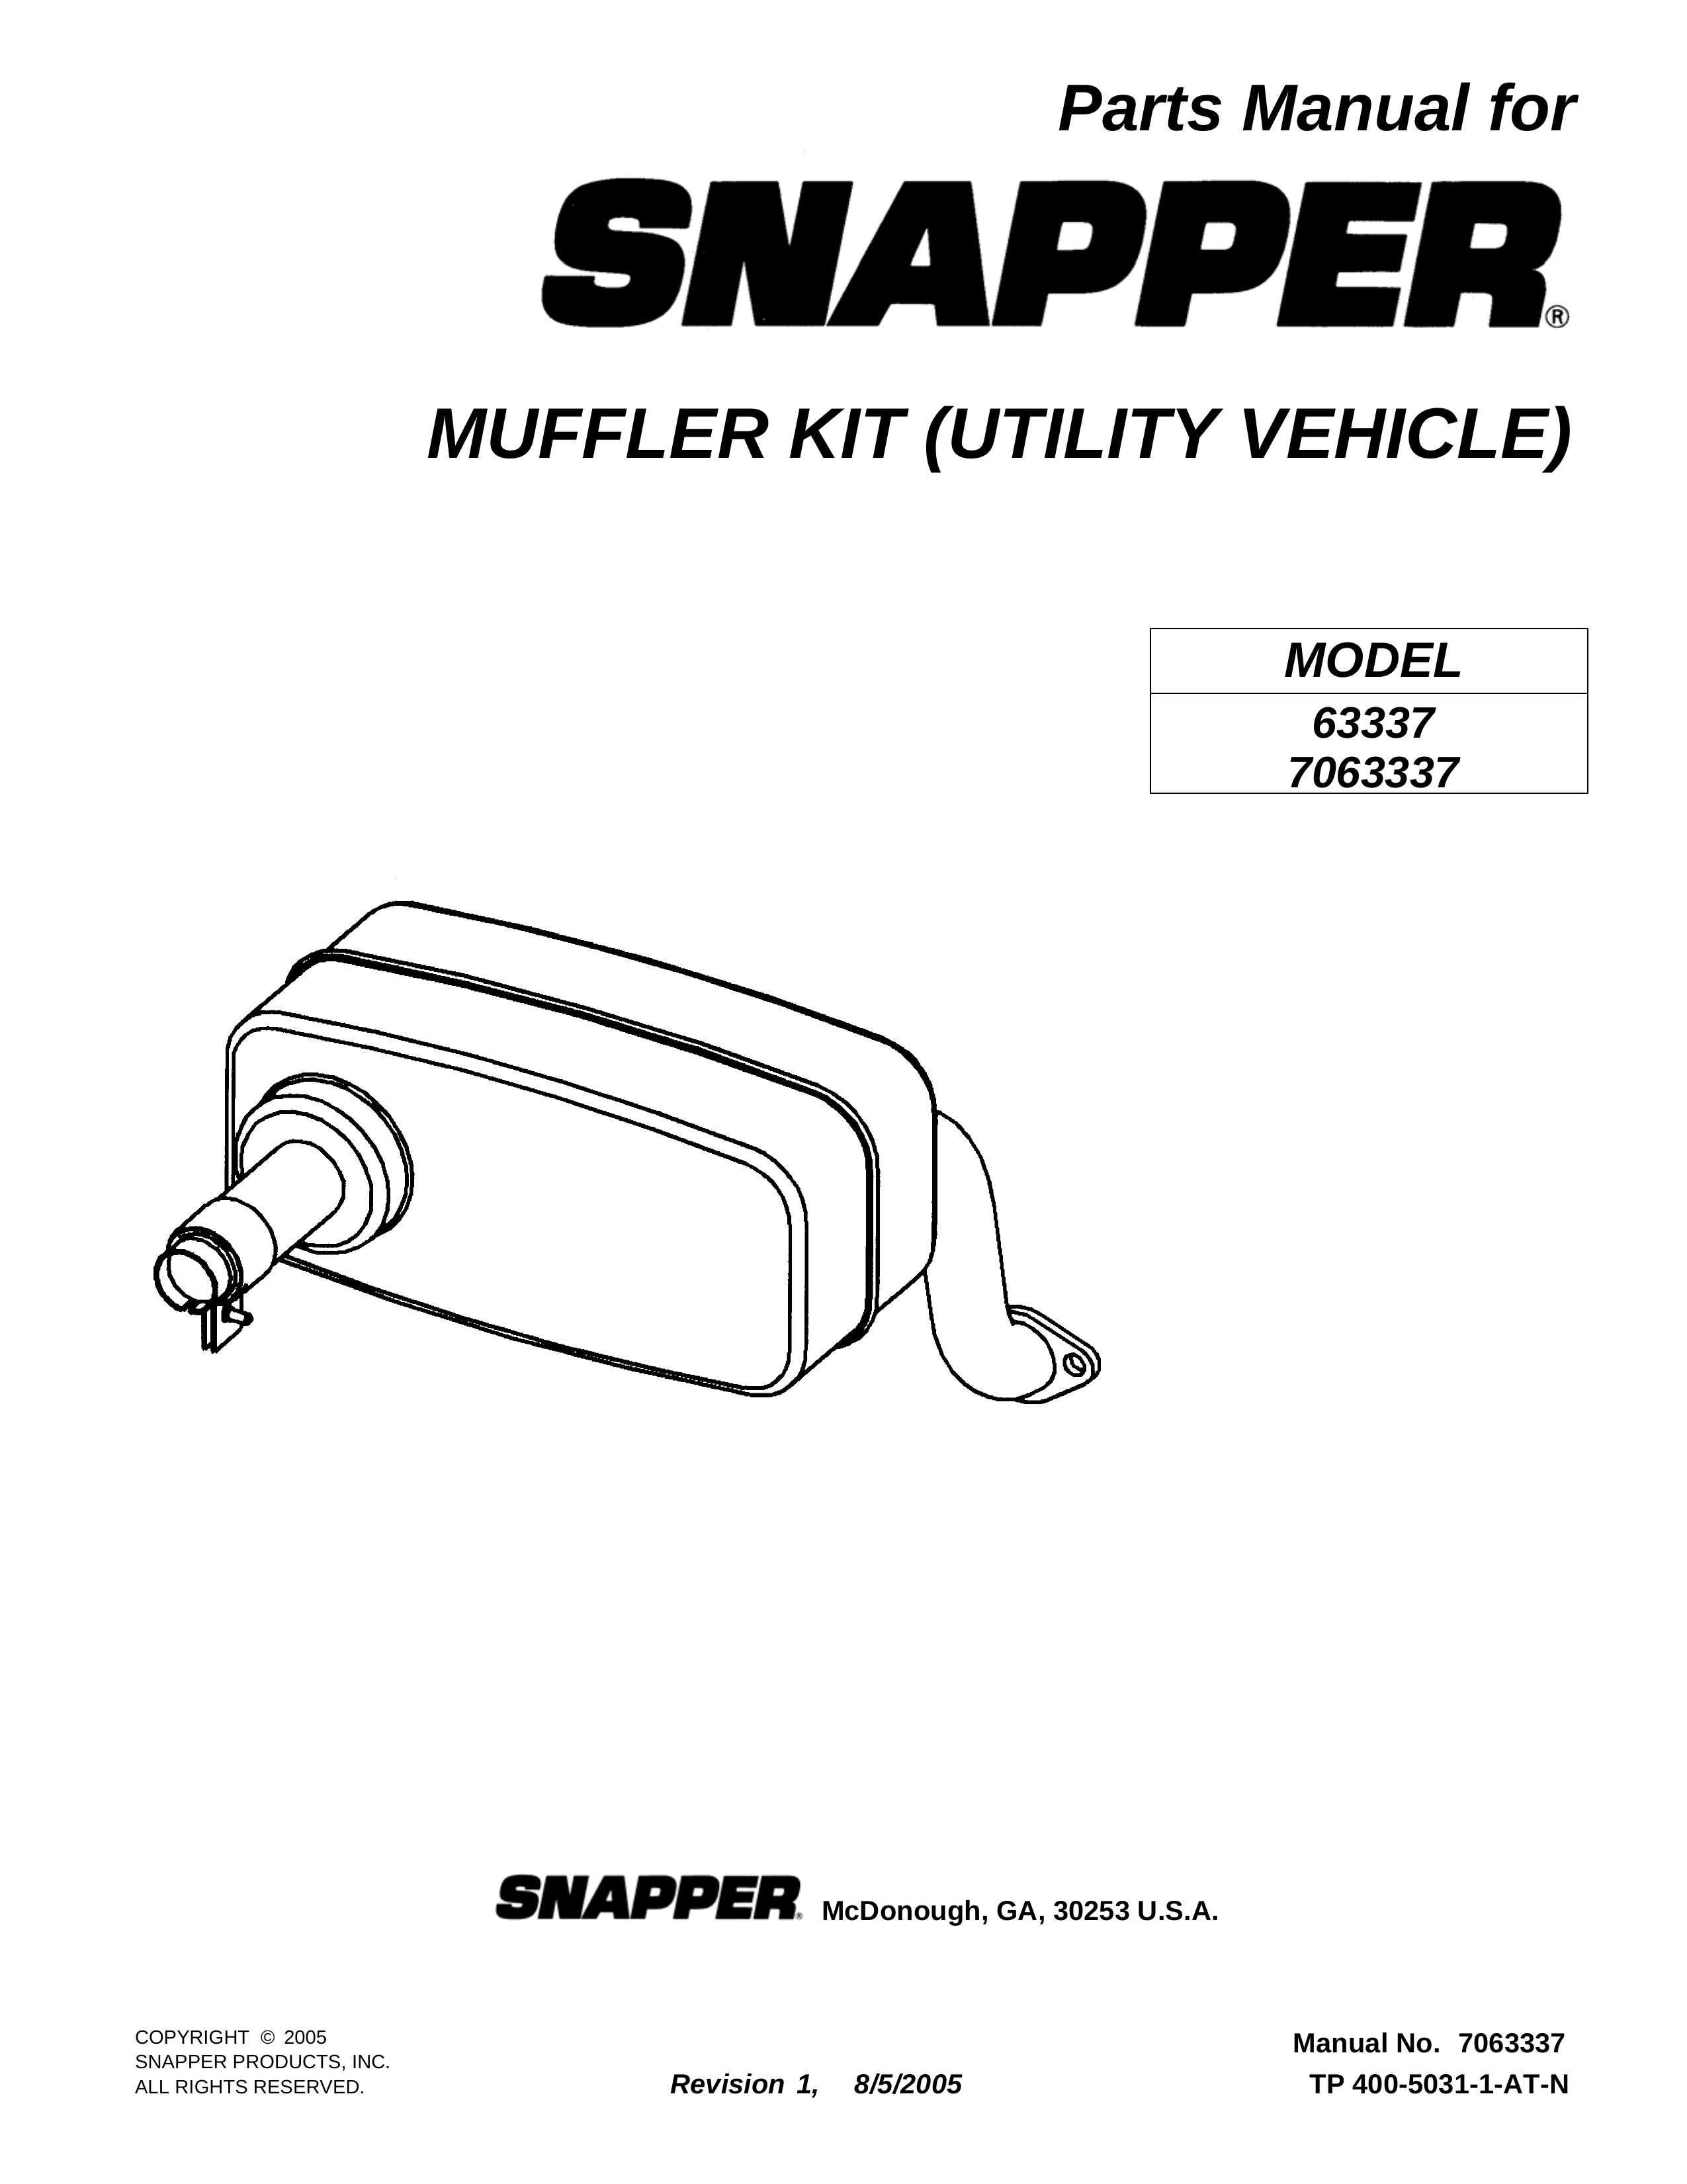 Snapper 63337 Utility Vehicle User Manual